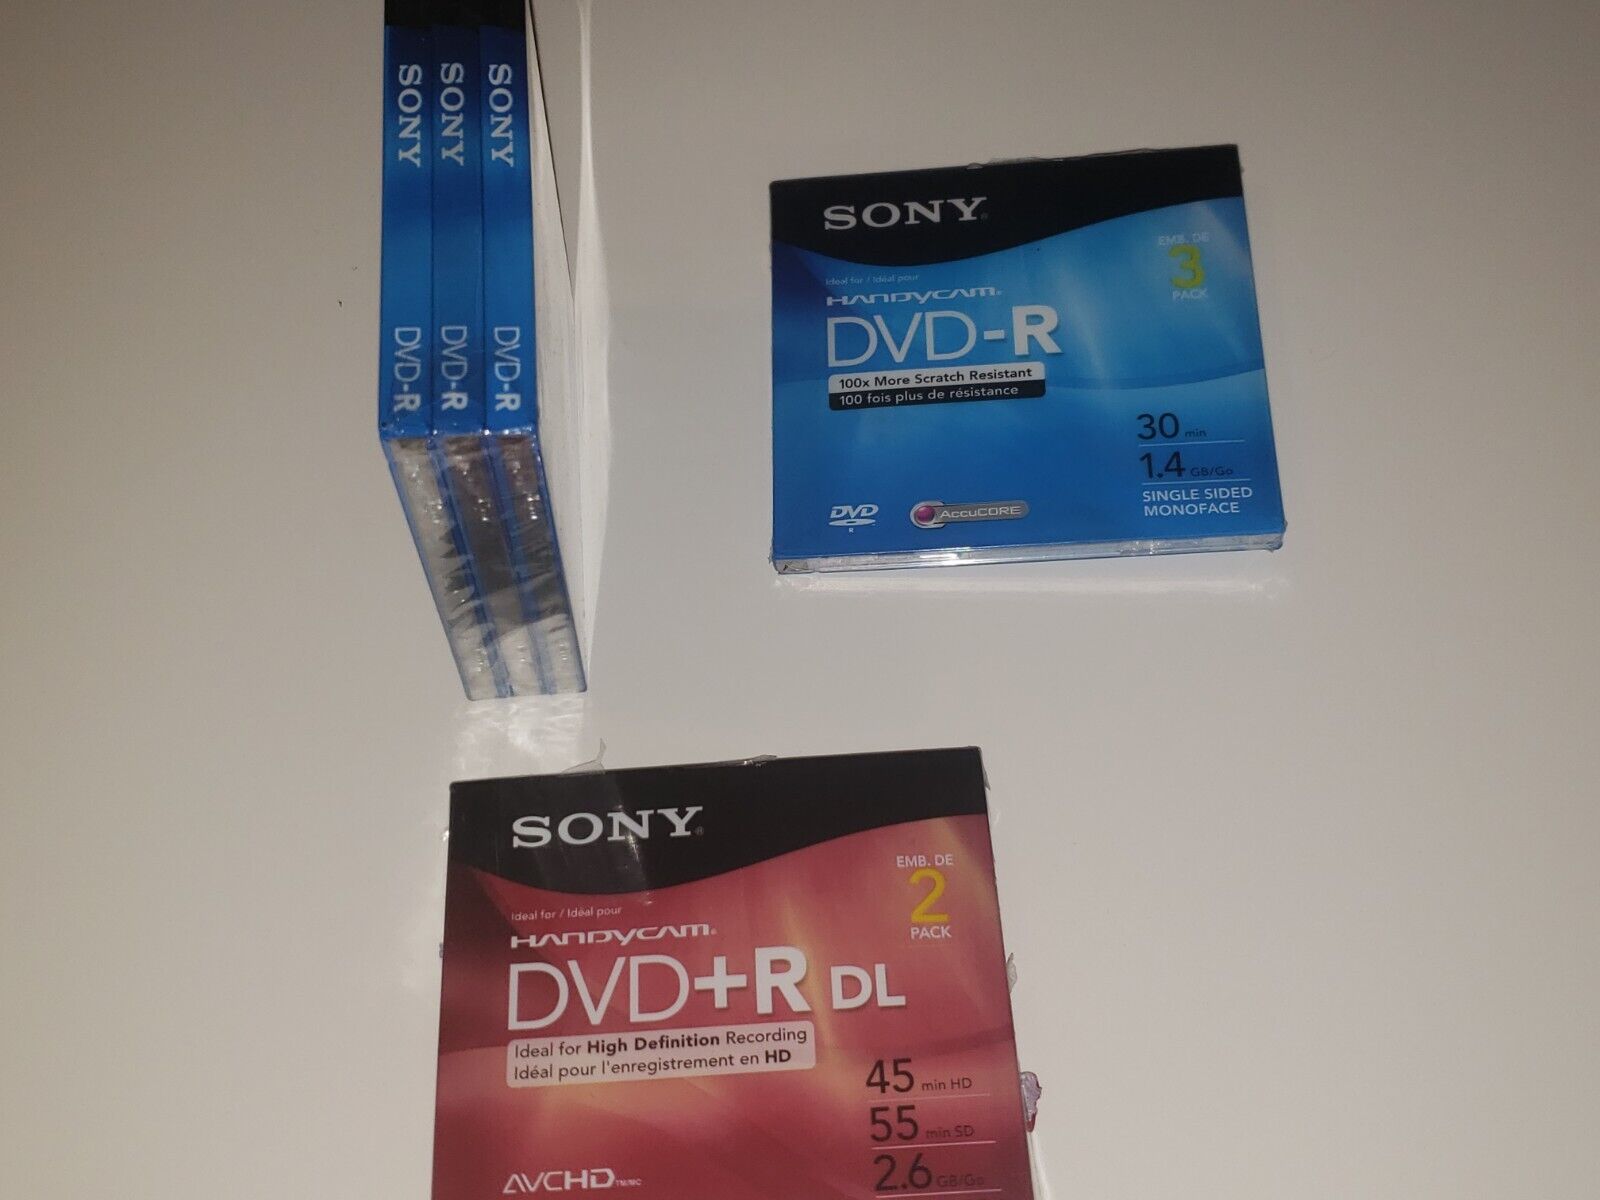 5 SONY HANDYCAM DVD-R 1.4GB 30 MINUTES SINGLE SIDED BRAND NEW SEALED LOT OF 5